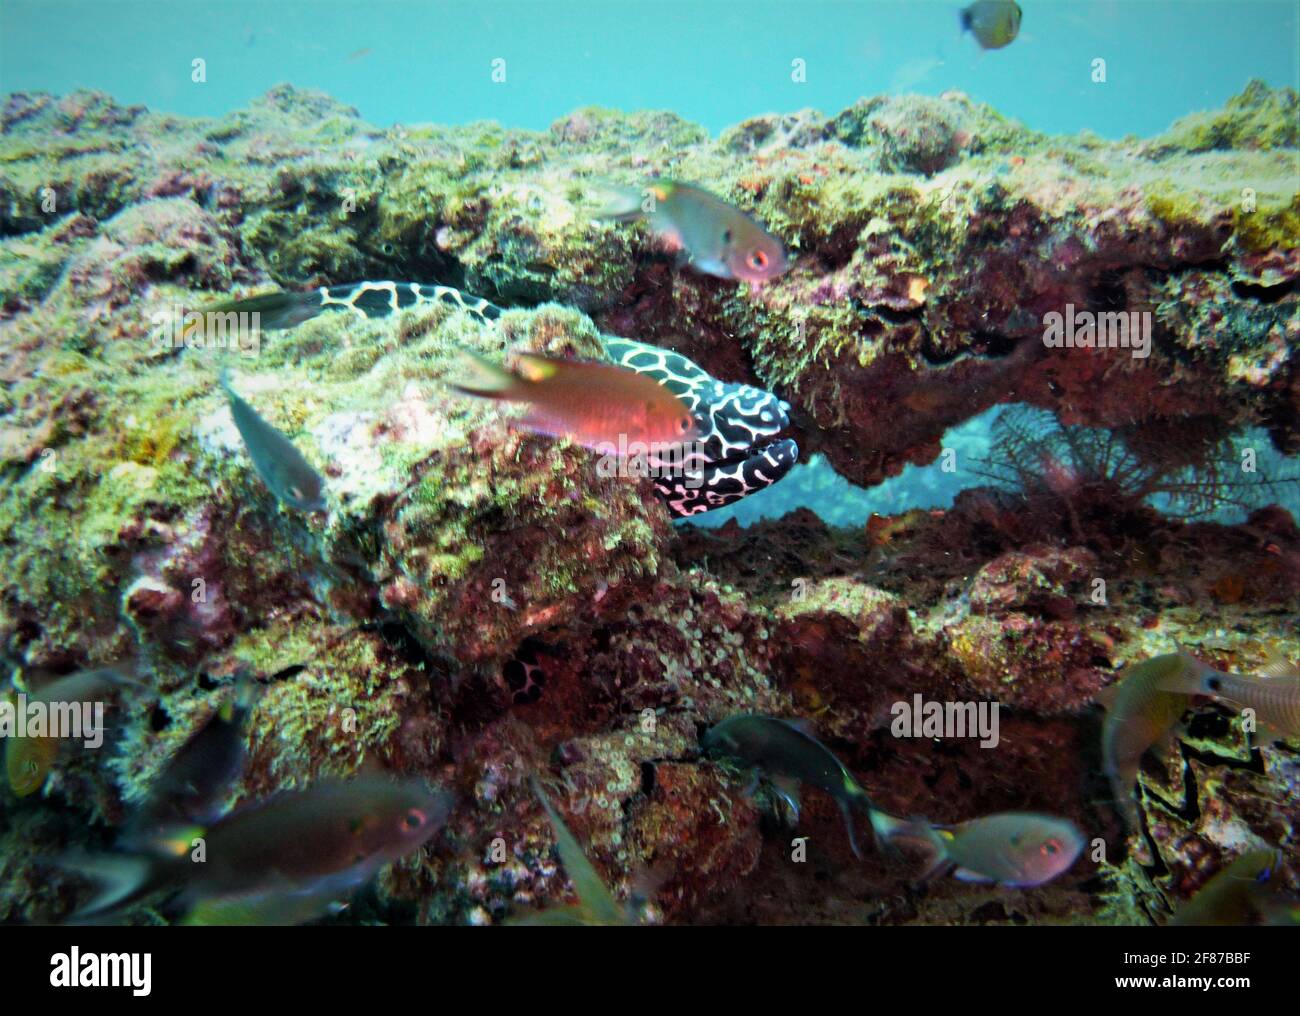 A beautiful white and black spotted Moray ell hiding in the coral reef at the Similan Islands in Thailand. Stock Photo